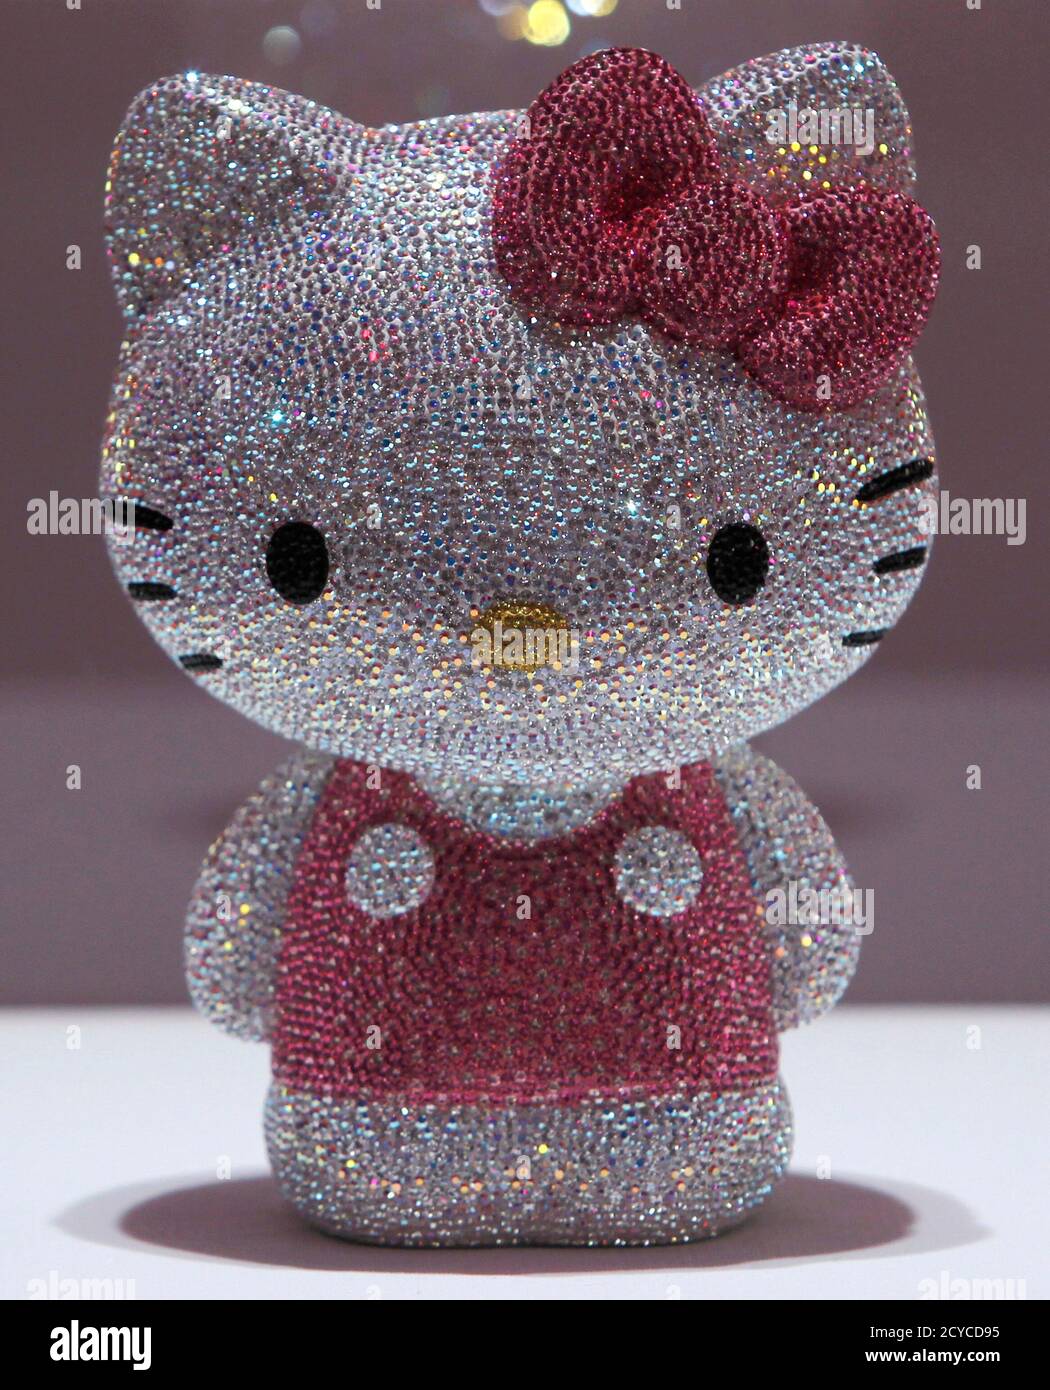 A Hello Kitty figurine, studded with a total of 19,636 Swarovski crystals,  is displayed during a press preview of Swarovski's Hello Kitty collection  at an event entitled 